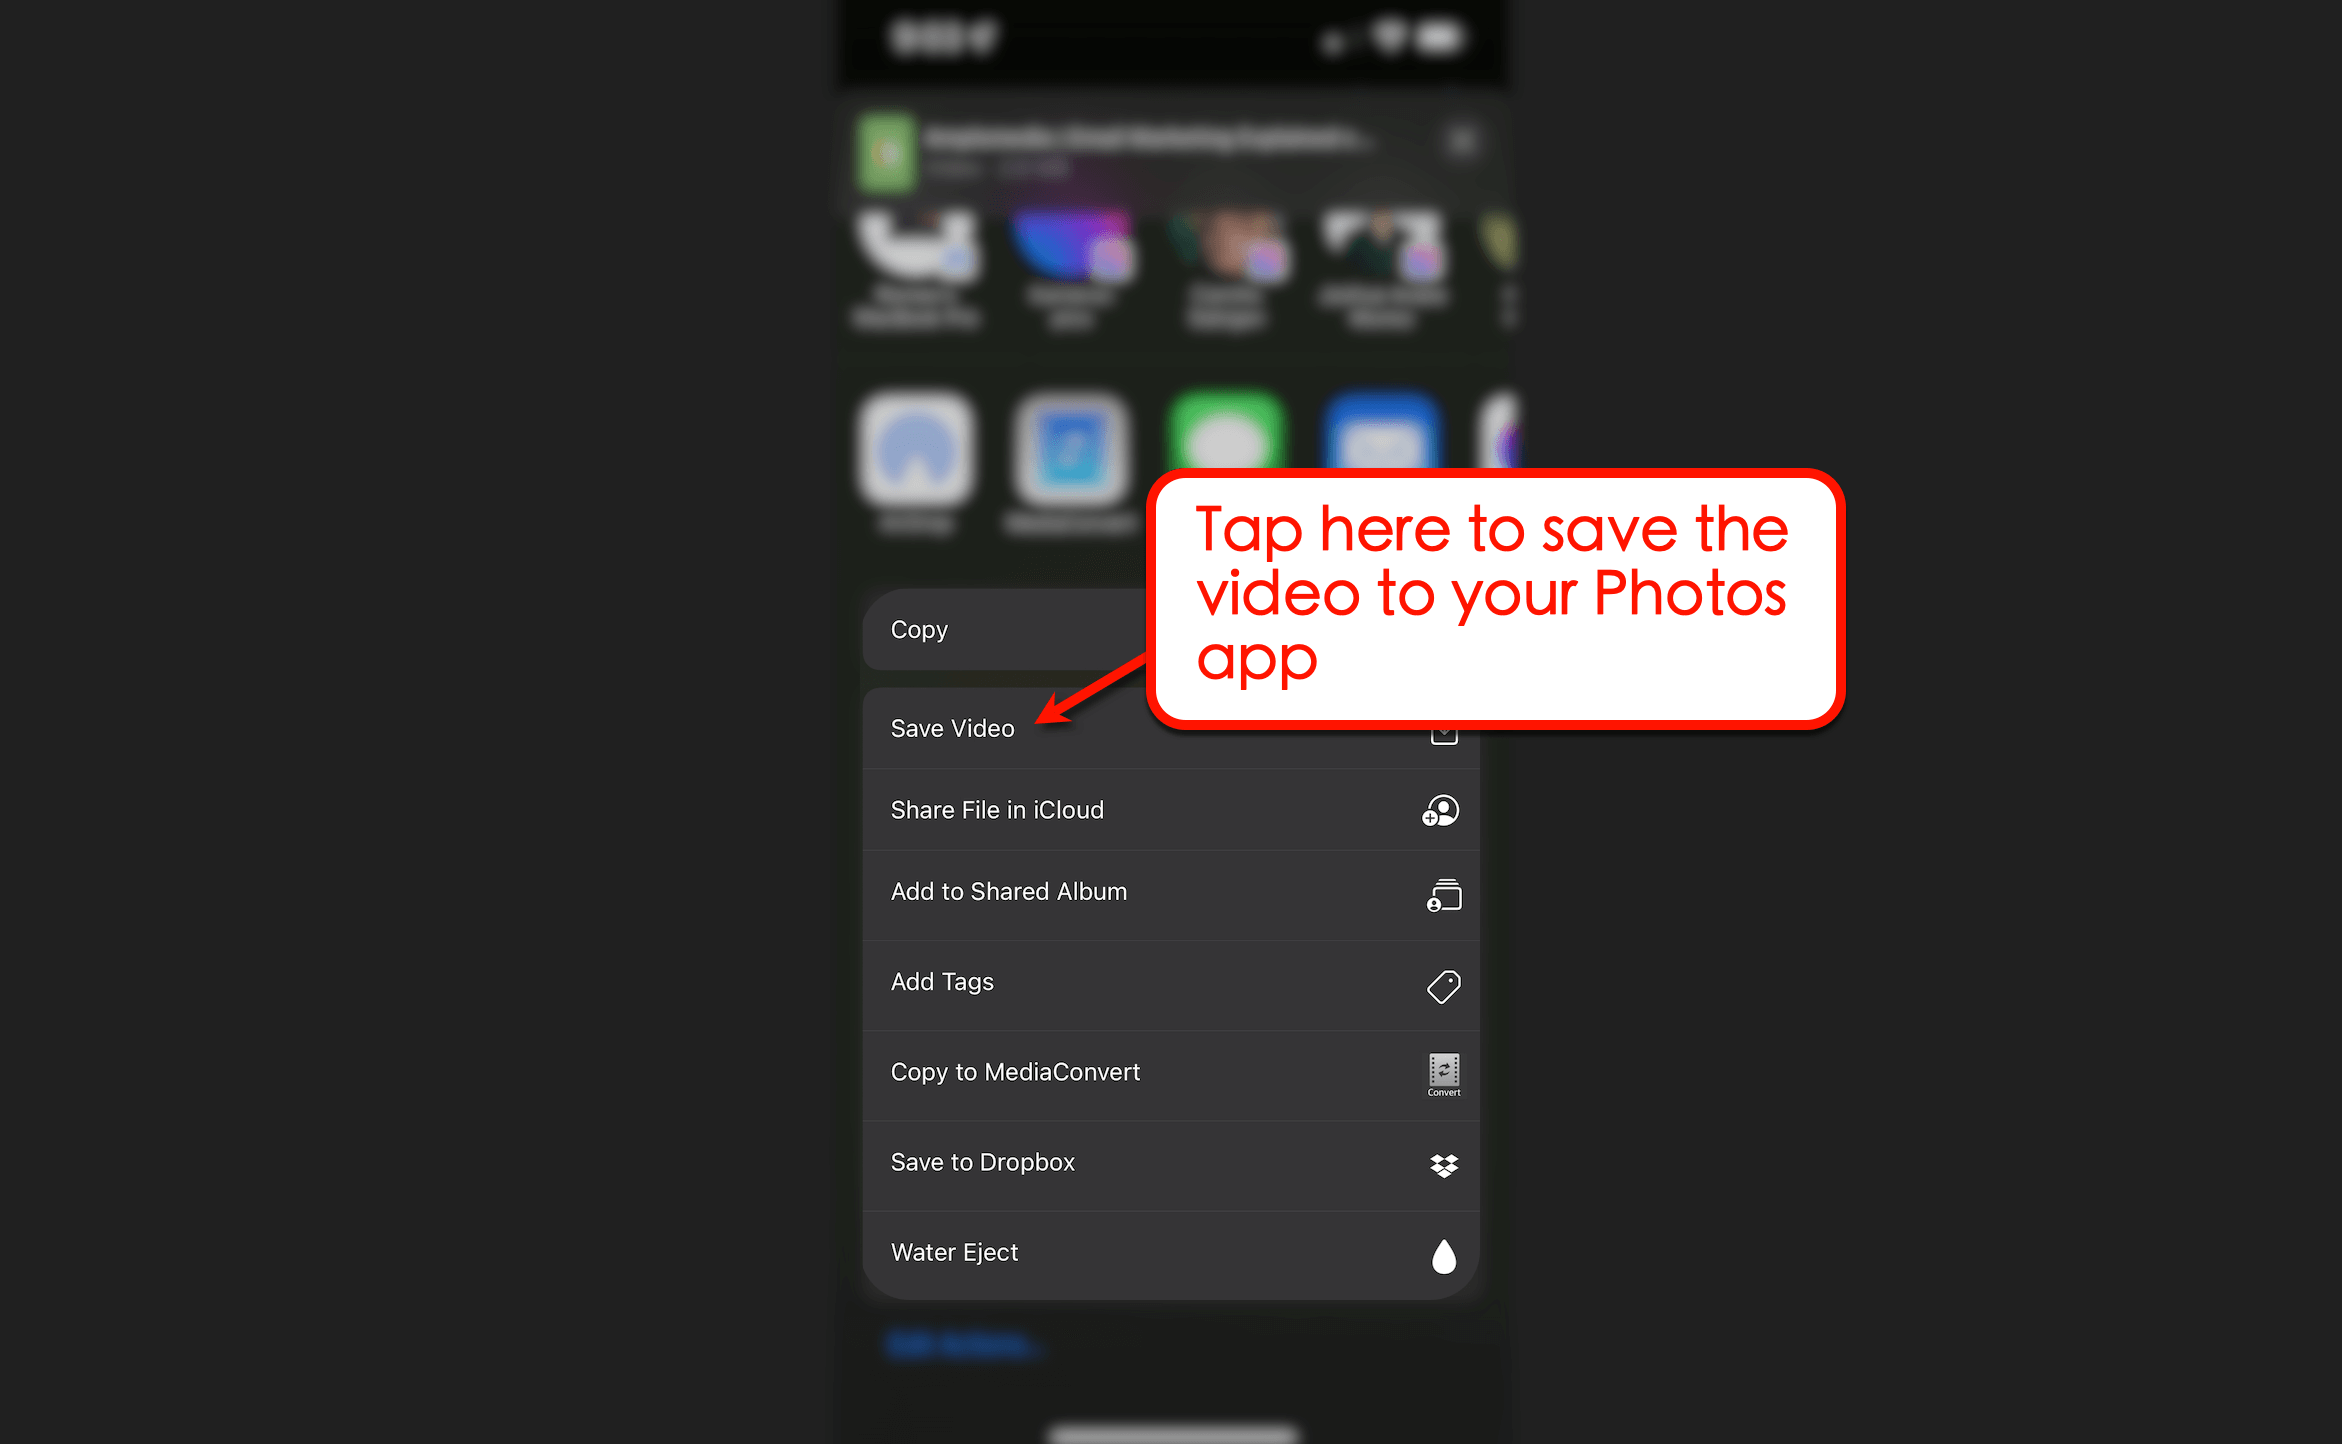 How to save the video to your Photos app